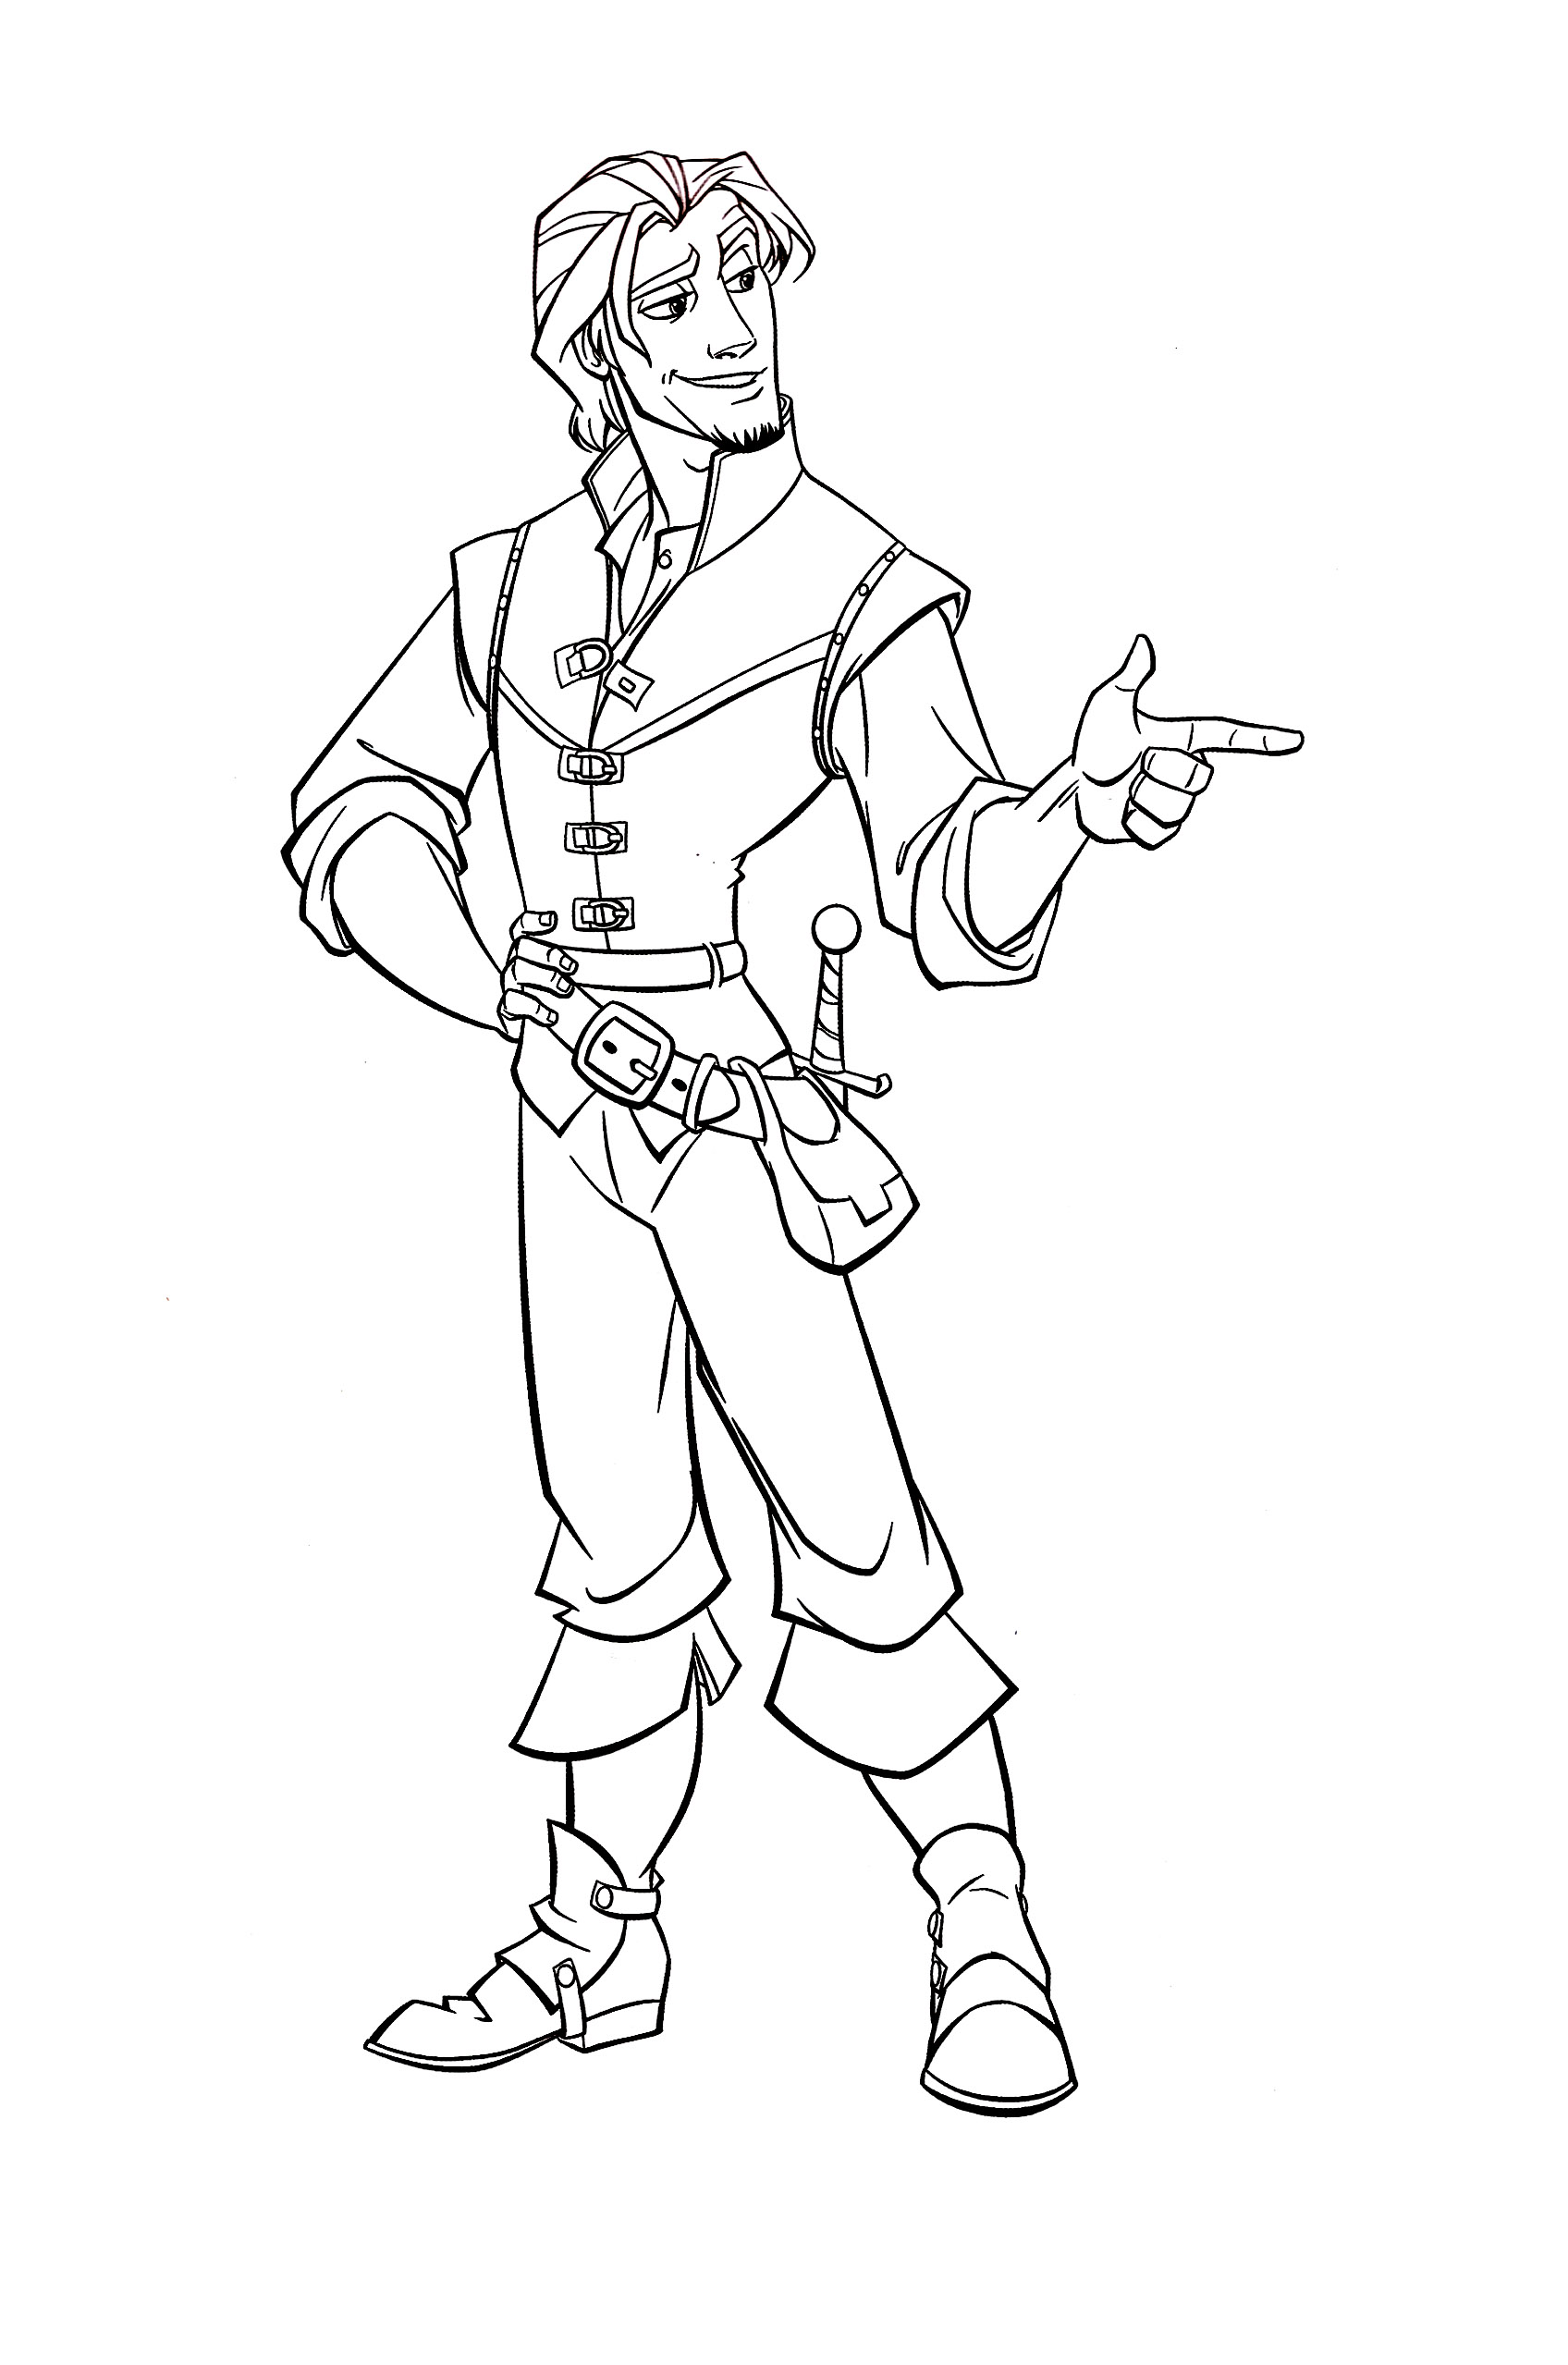 Printable Tangled coloring page to print and color for free : Flynn Rider